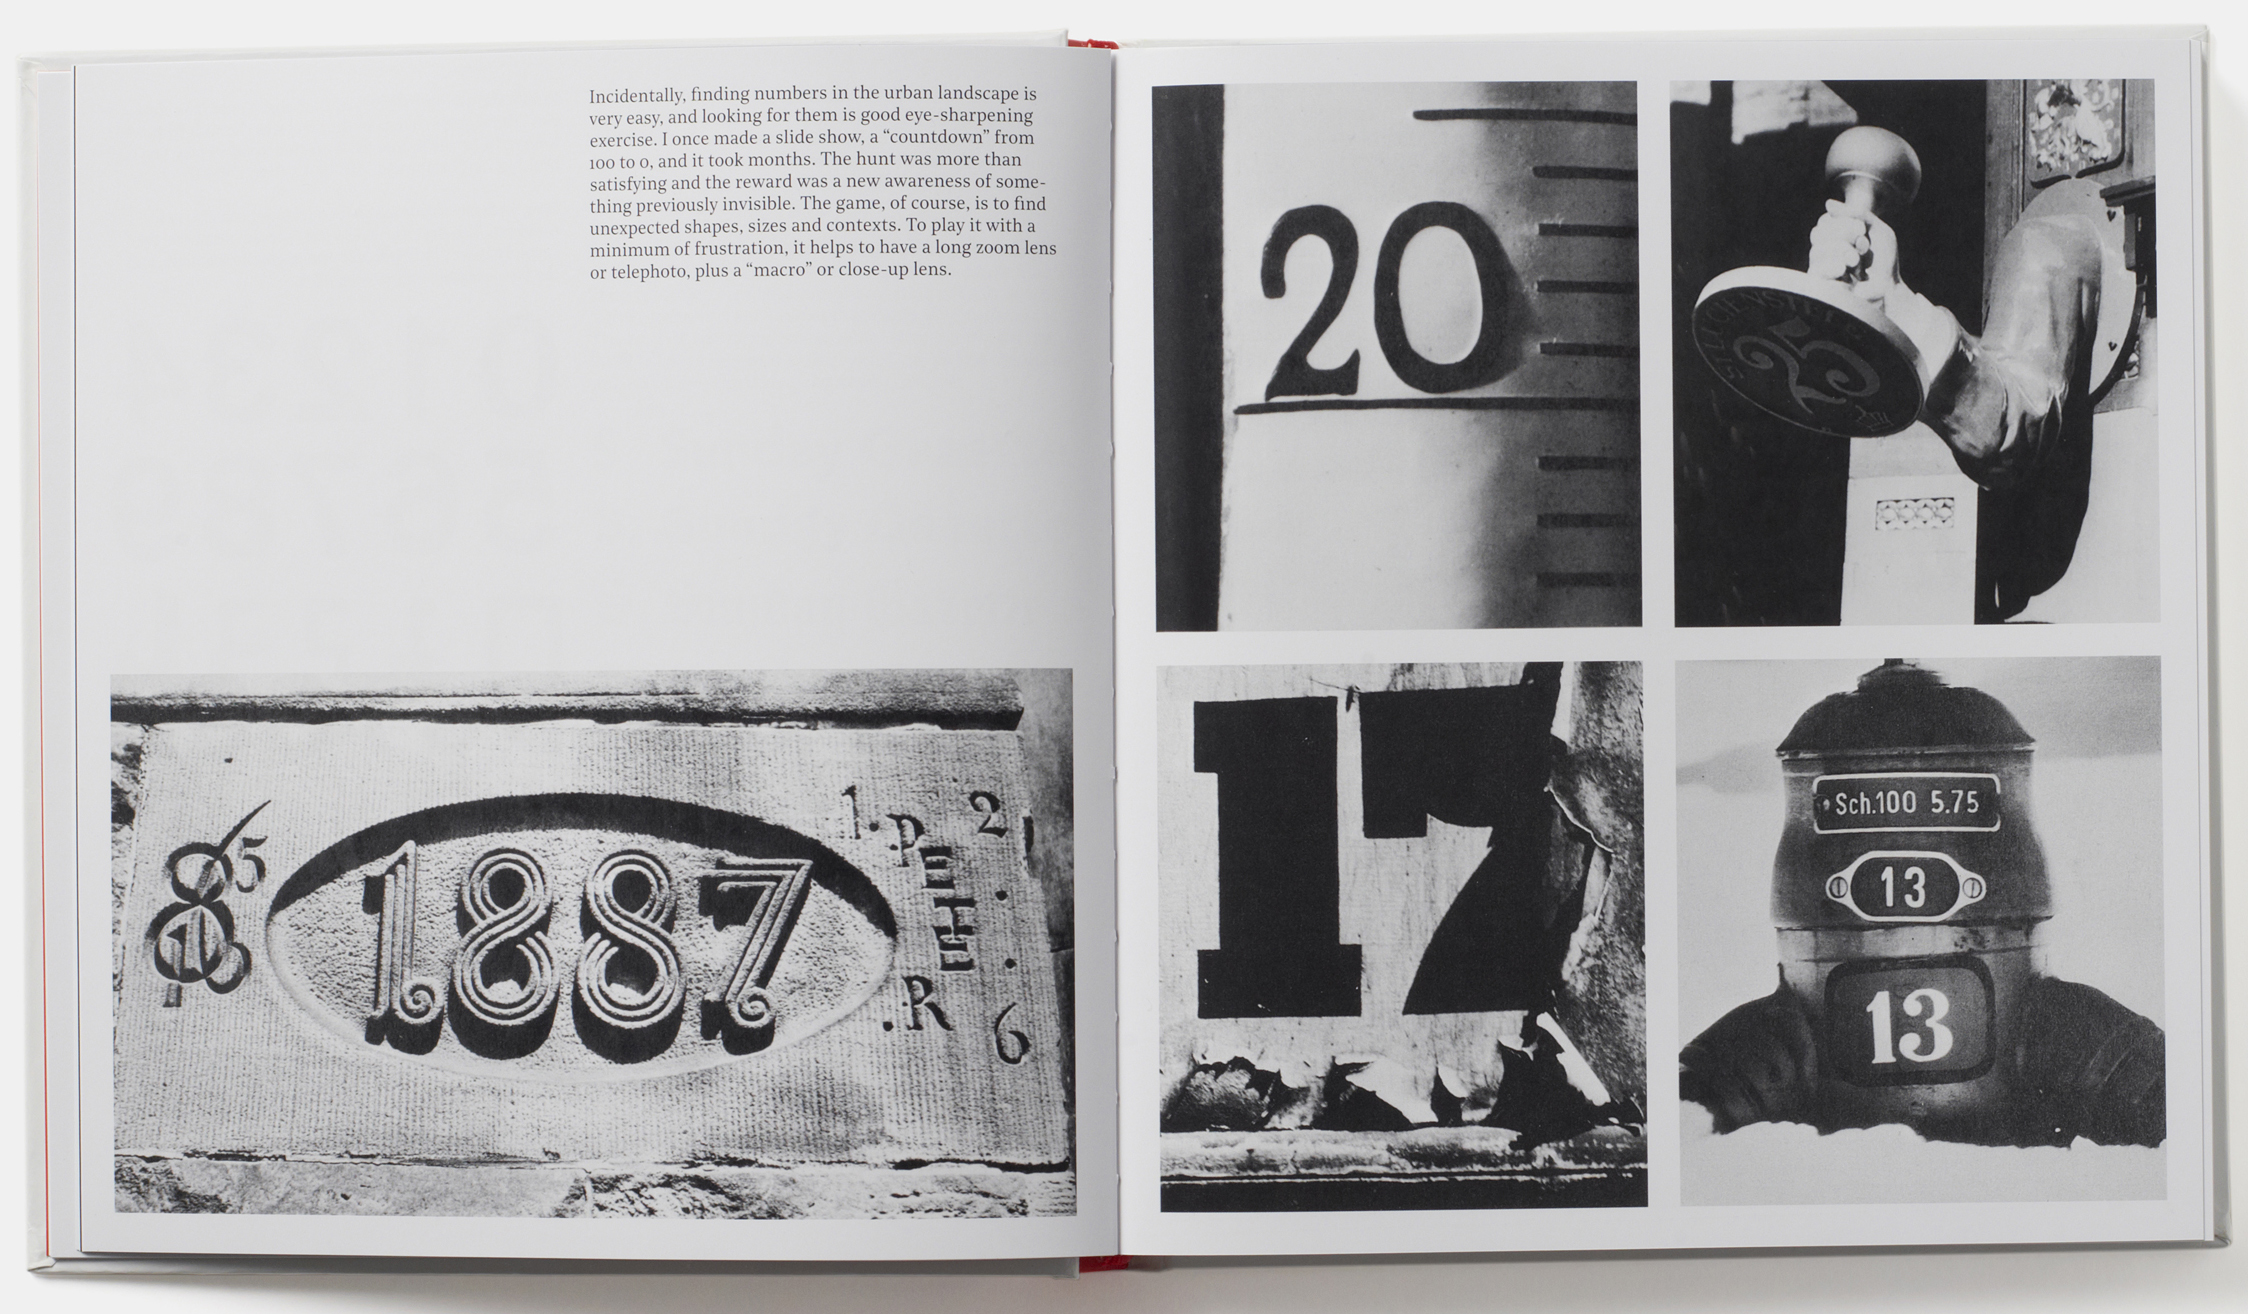 A spread from Michael Bierut's newly redesigned edition of George Nelson's book How to See